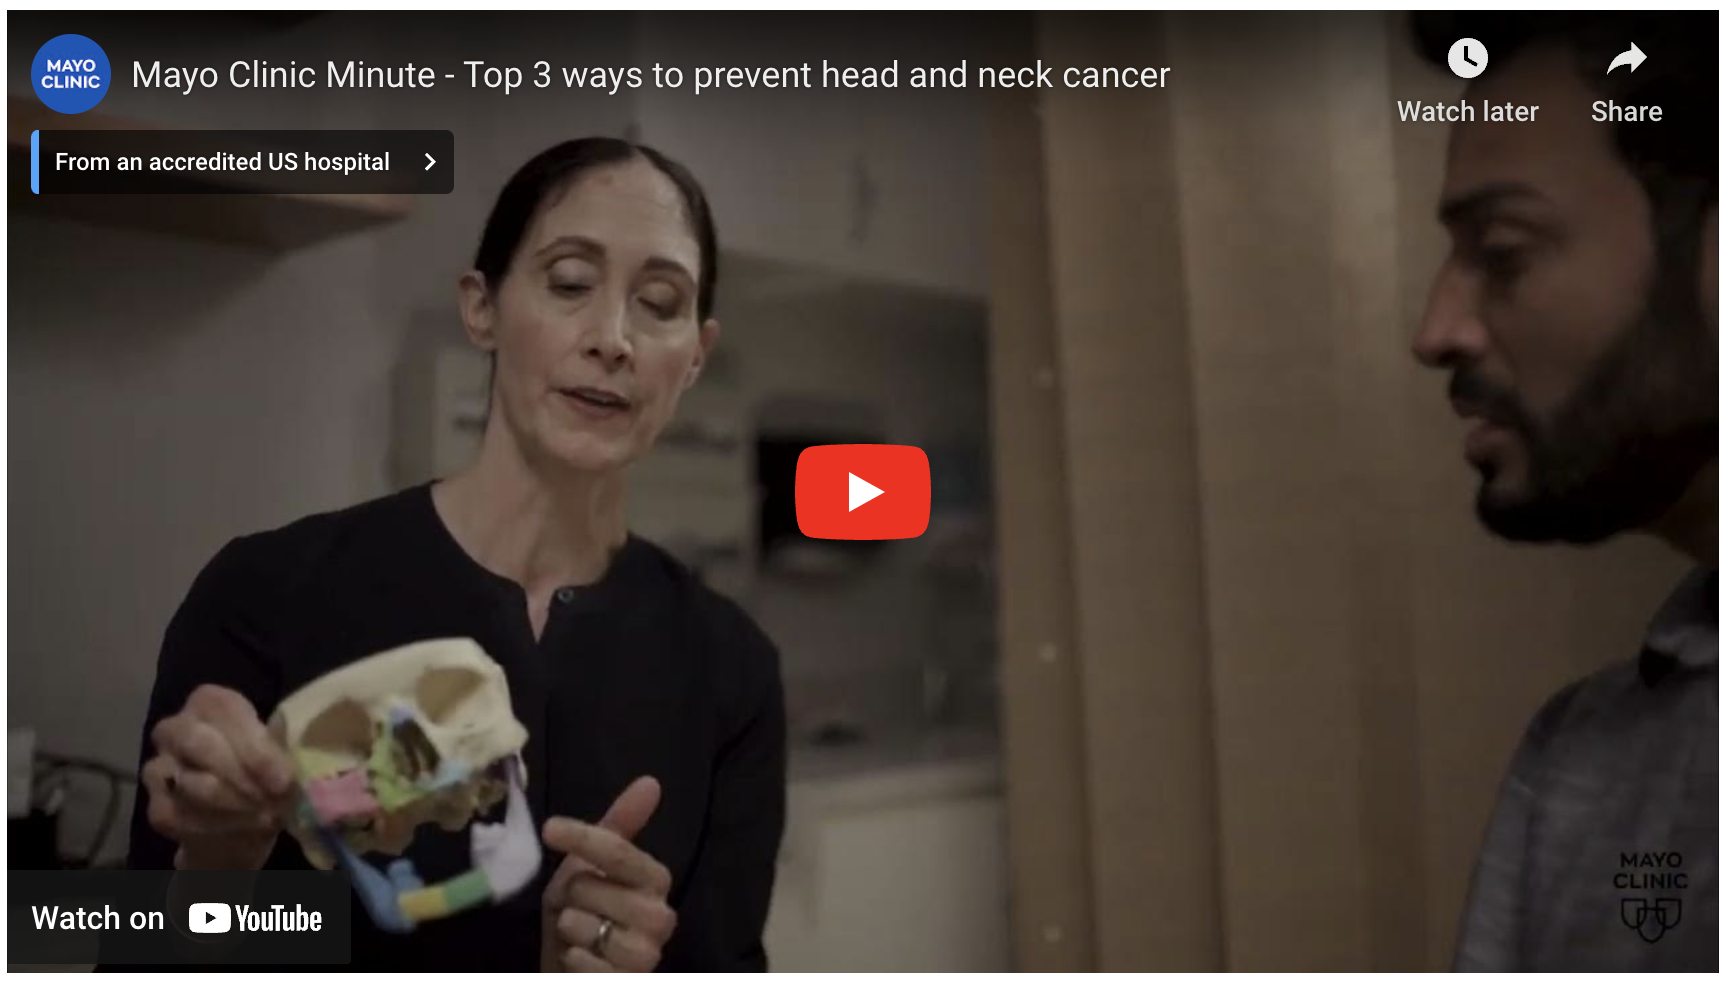 Mayo Clinic Minute - Top 3 ways to prevent head and neck cancer